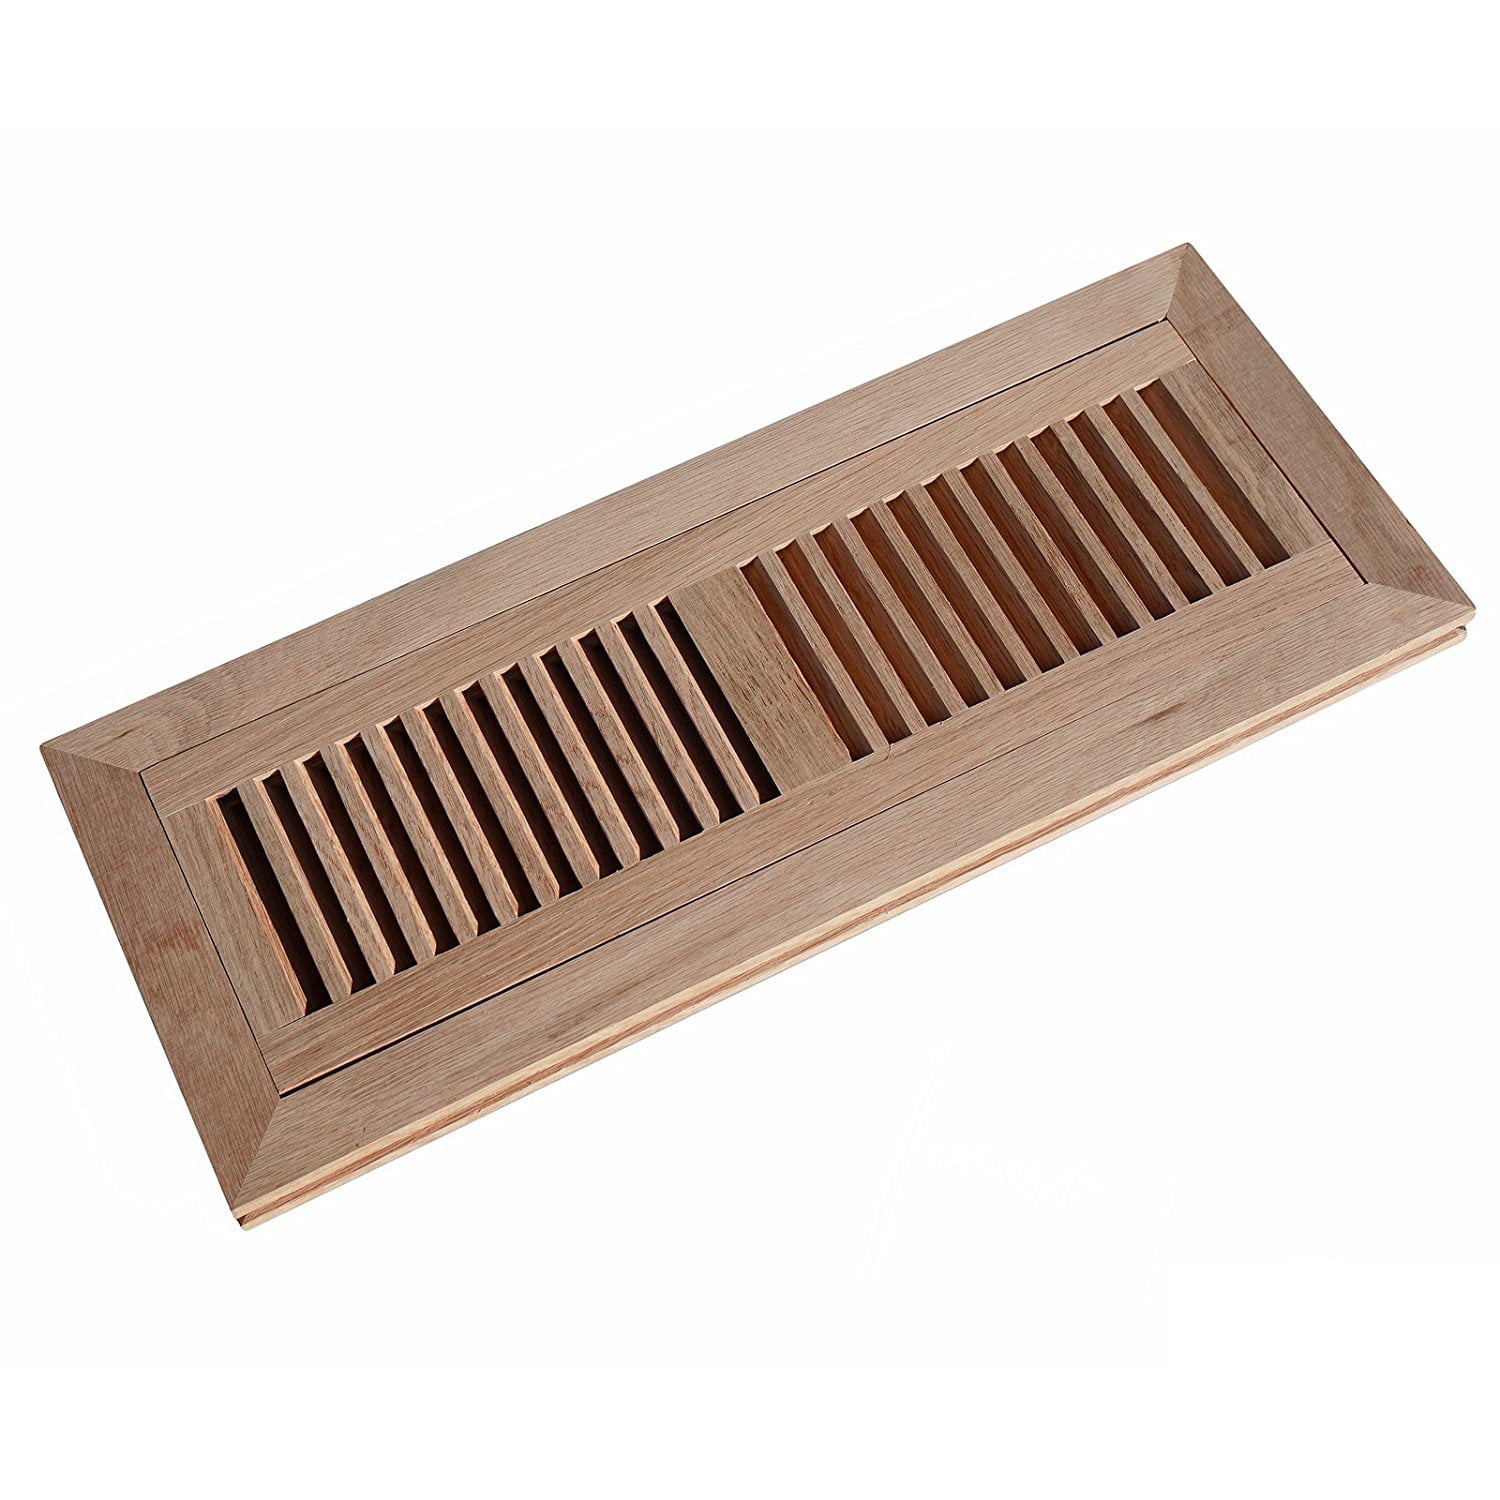 6" x 11-1/4" Inch Red Oak Cold Air Return Wood Vent 8" x 14" Overall 